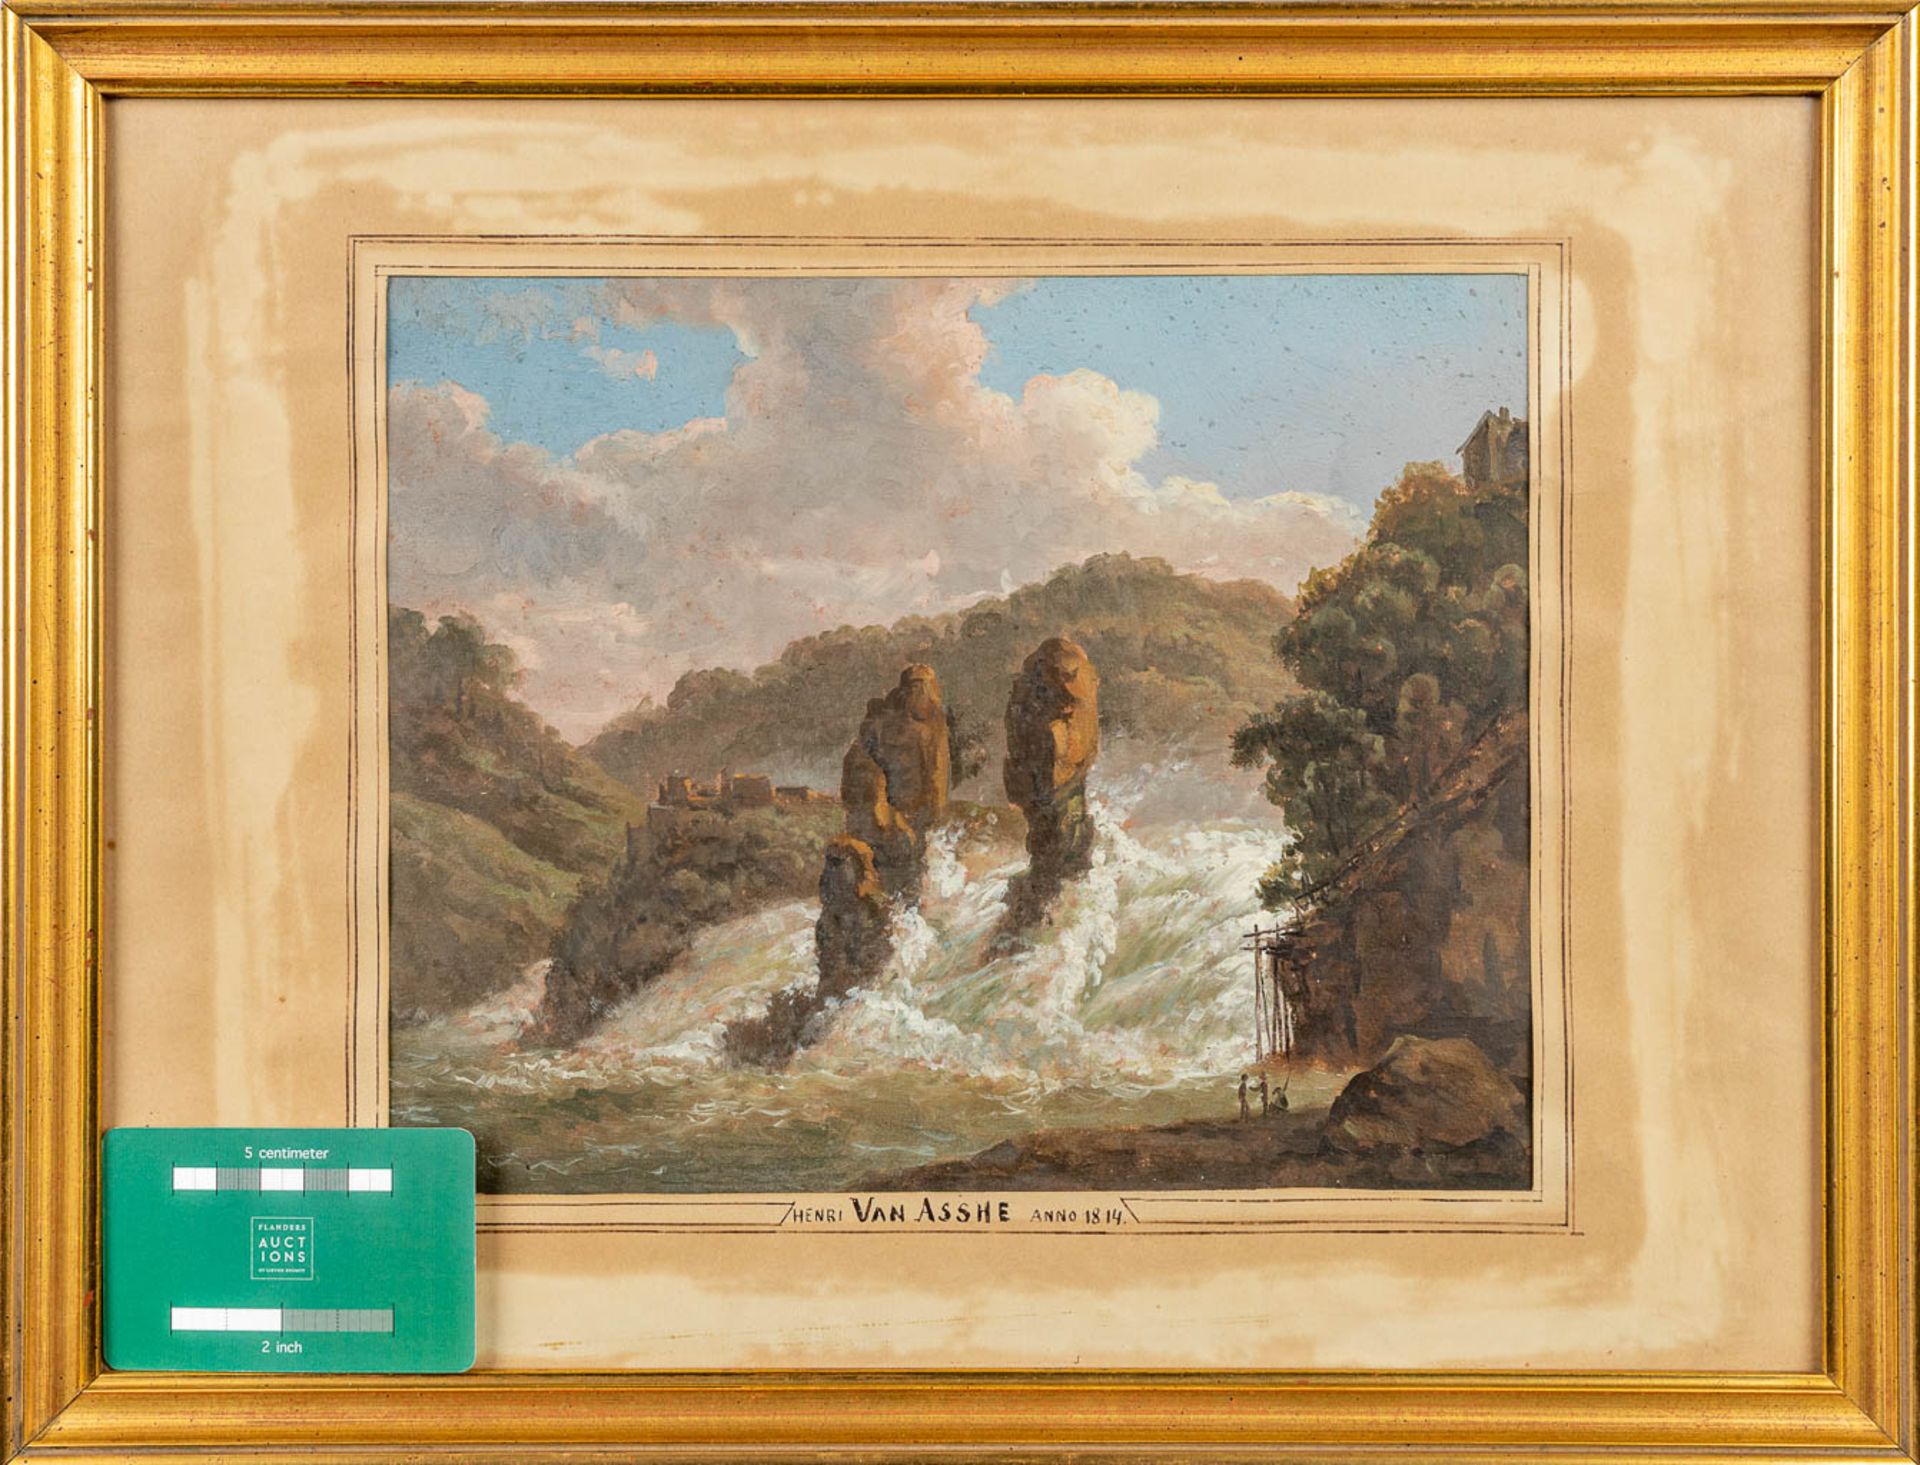 Henri VAN ASSCHE (1774-1841) 'The Waterfall' a painting, oil on paper. (26 x 20 cm) - Image 4 of 7